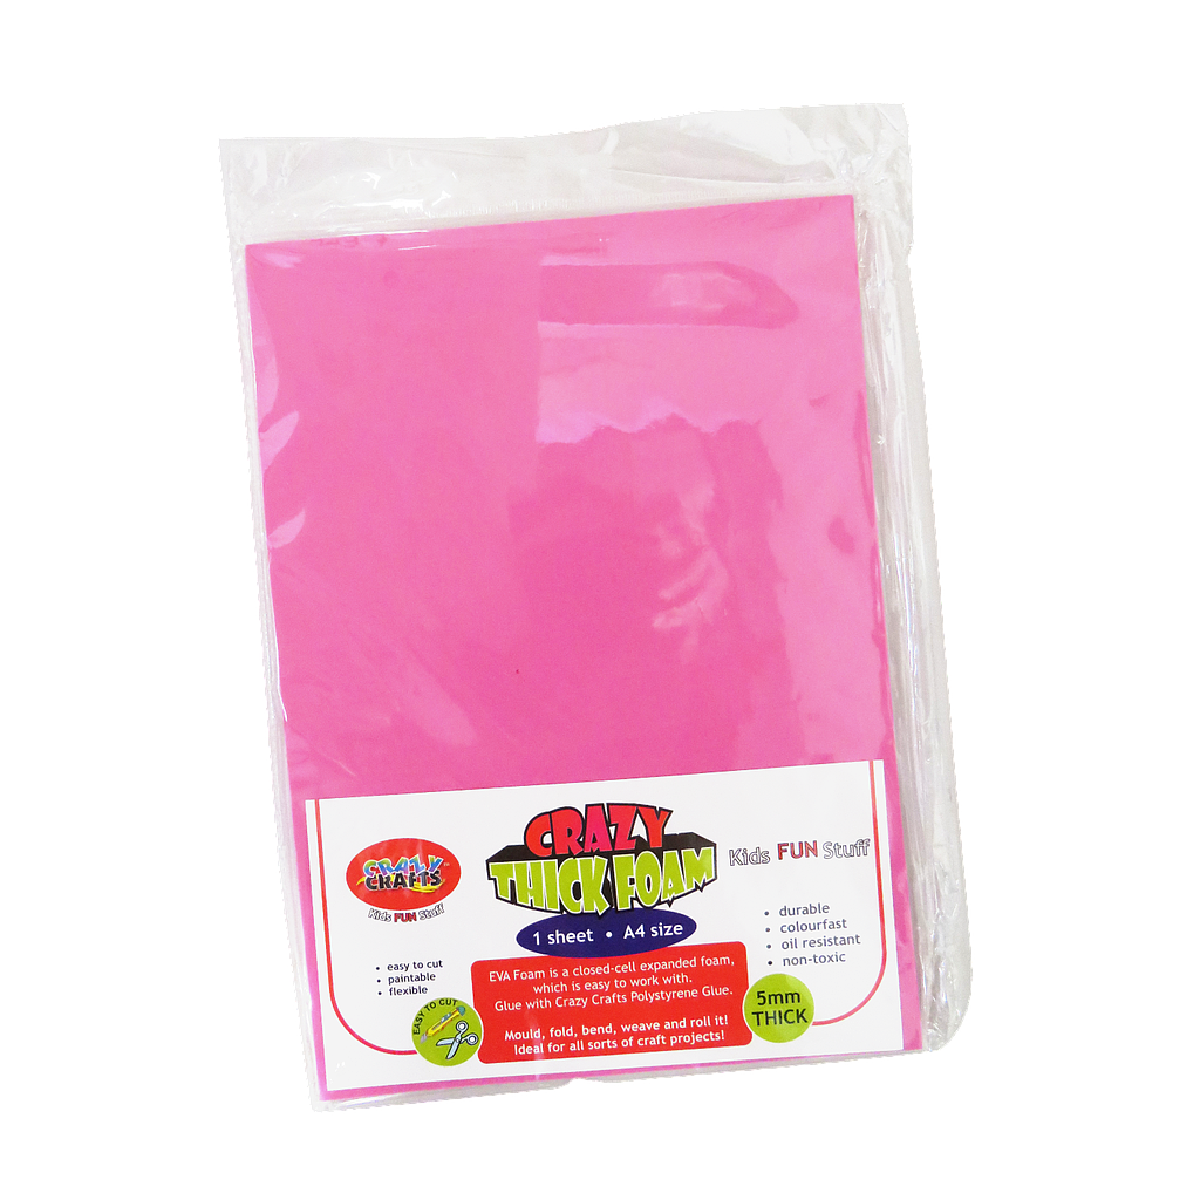 Crazy Crafts Thick Foam Smooth A4, Cerise Pink